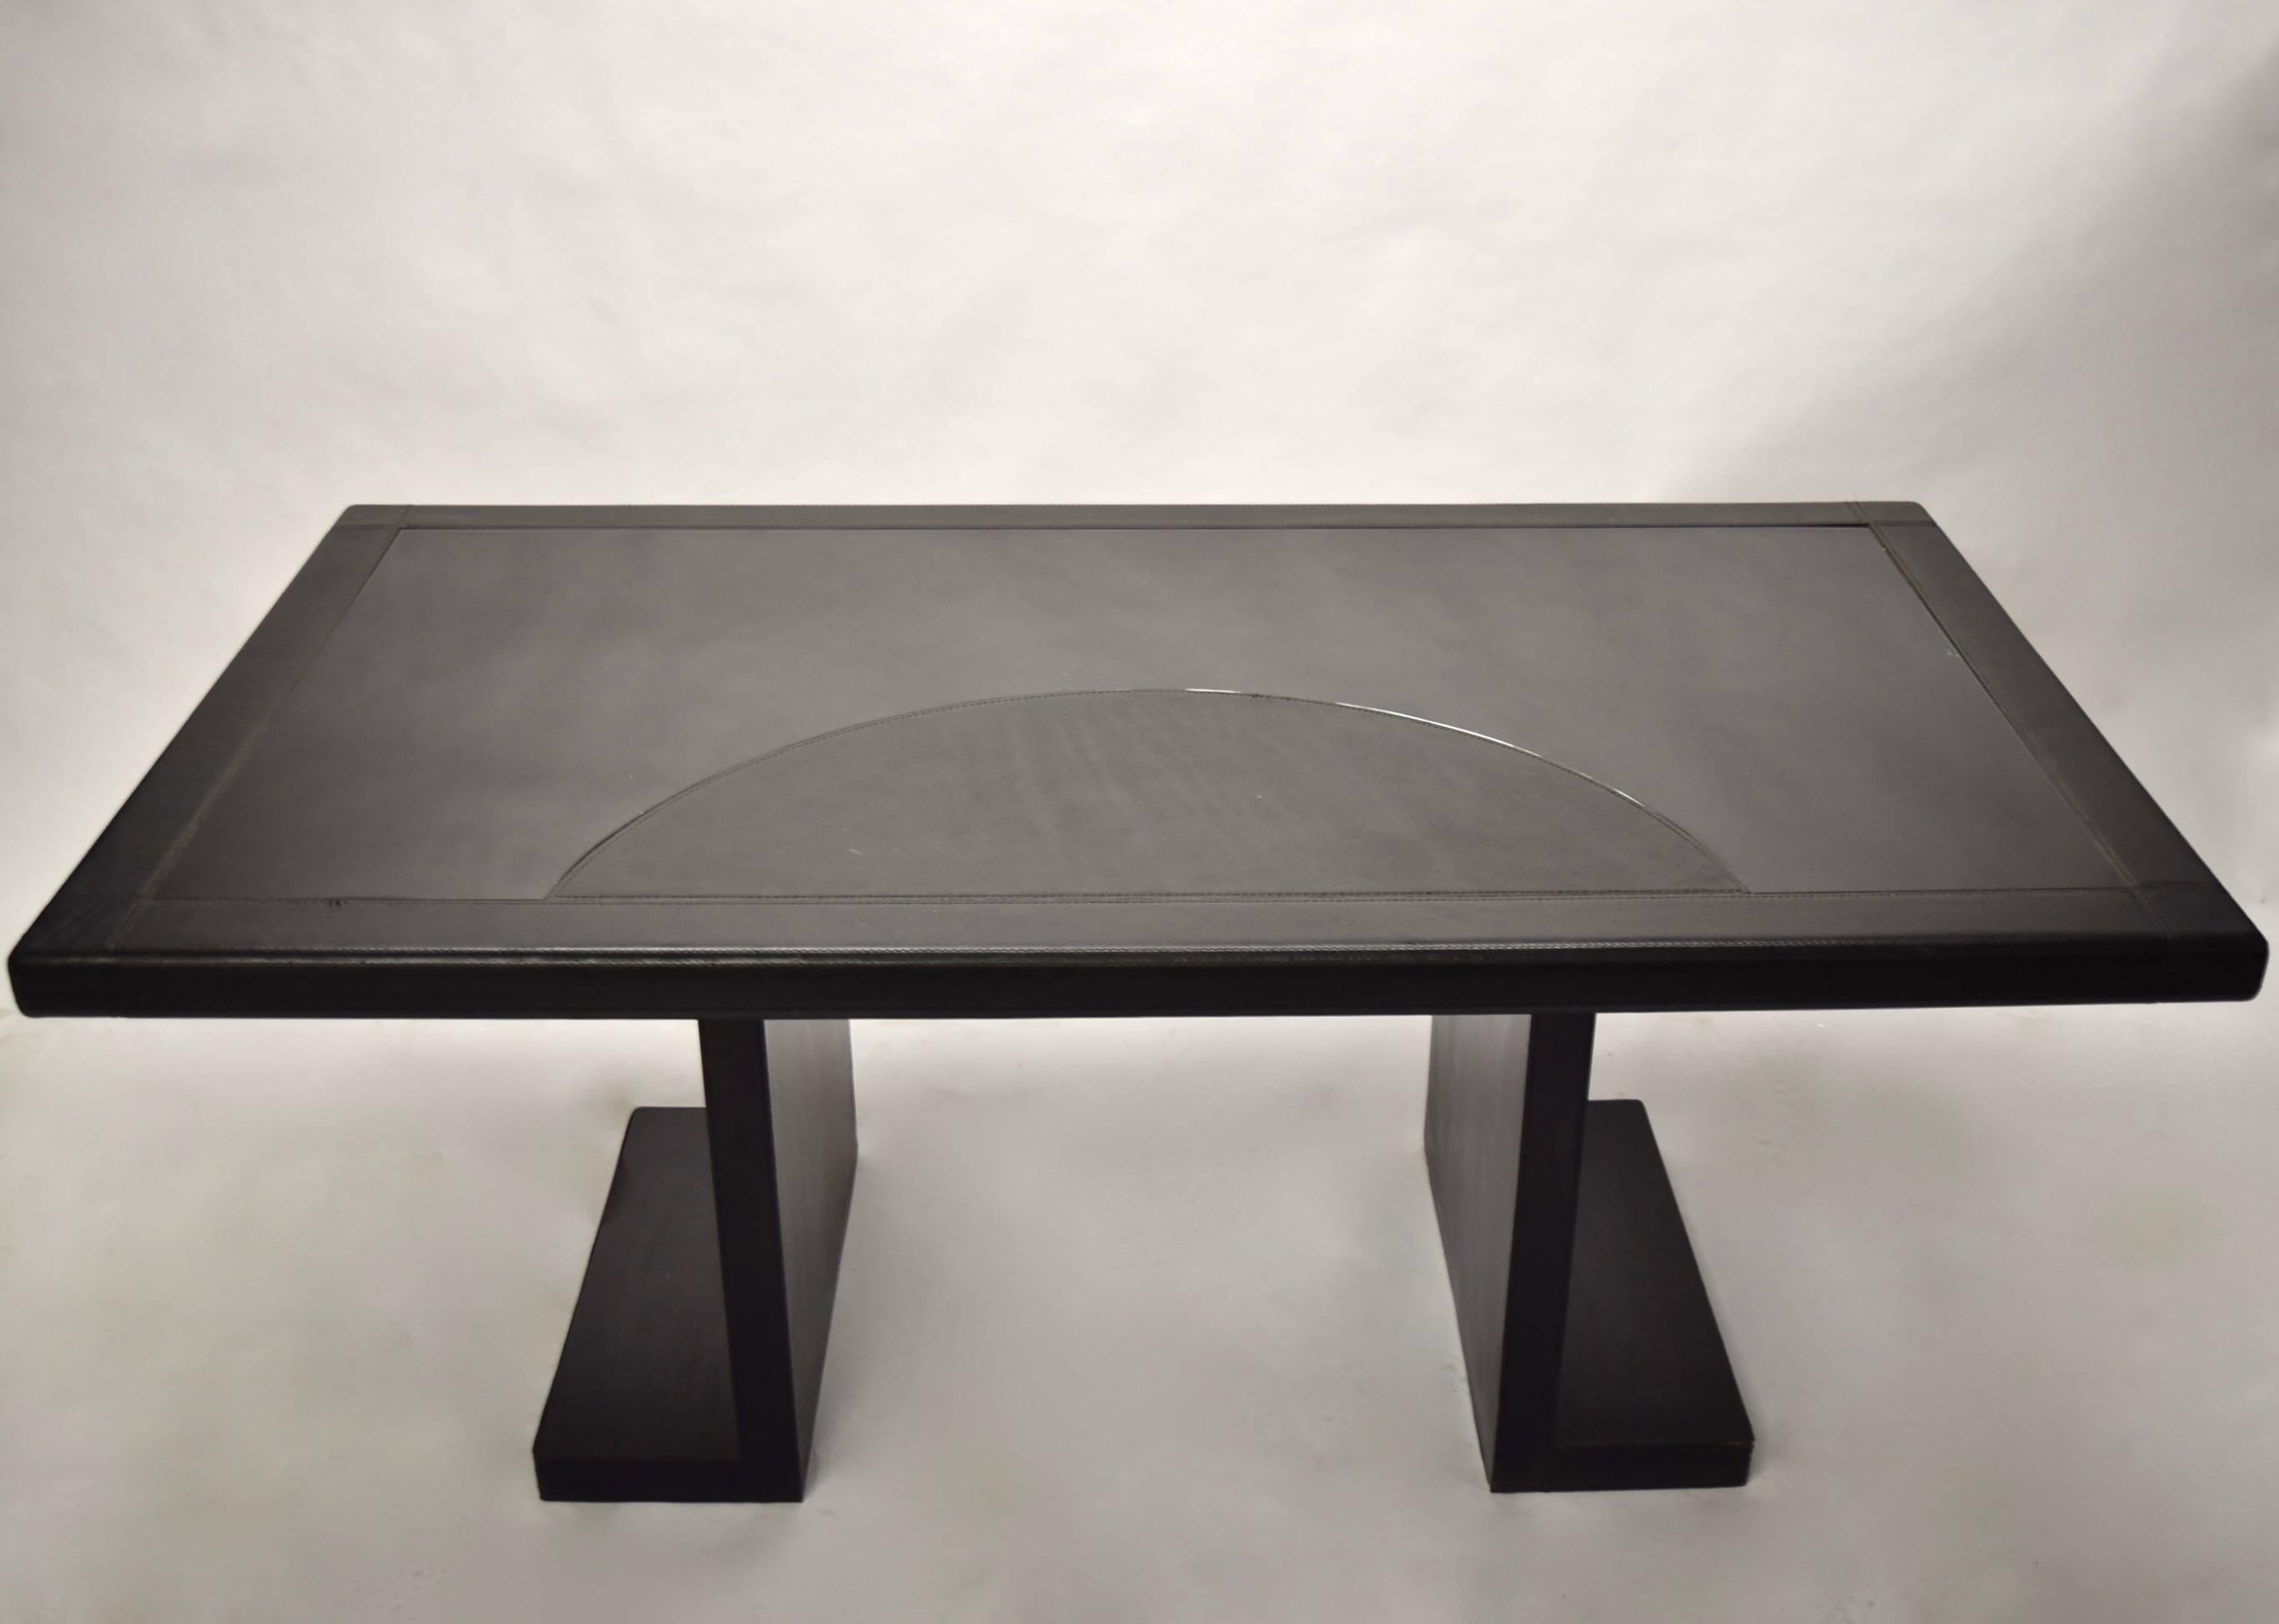 Mid-Century Modern Desk by Guido Faleschini for i4Mariani, Distributed by Pace, Italy C. 1979